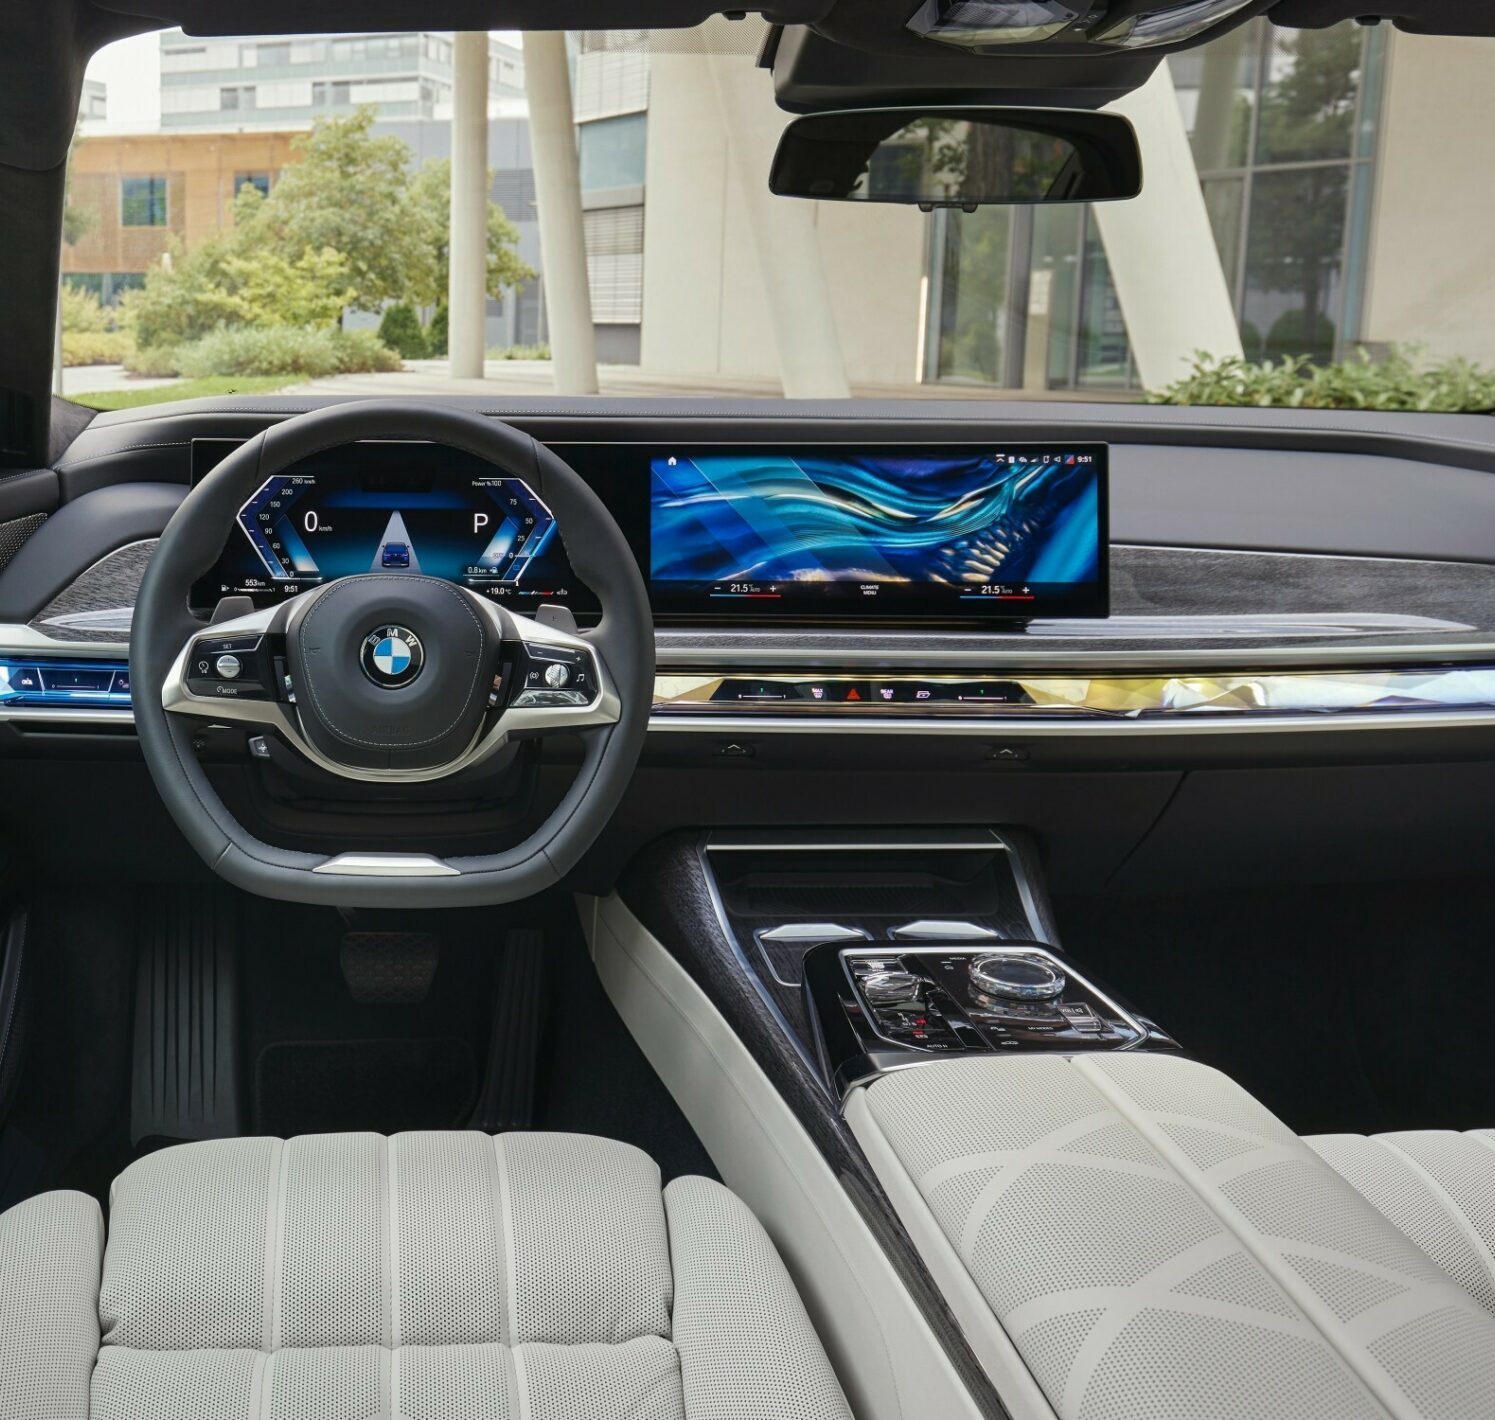 https://autofilter.sk/assets/images/rad-7/gallery/P90480889_lowRes_the-new-bmw-740d-xdr.jpg - obrazok